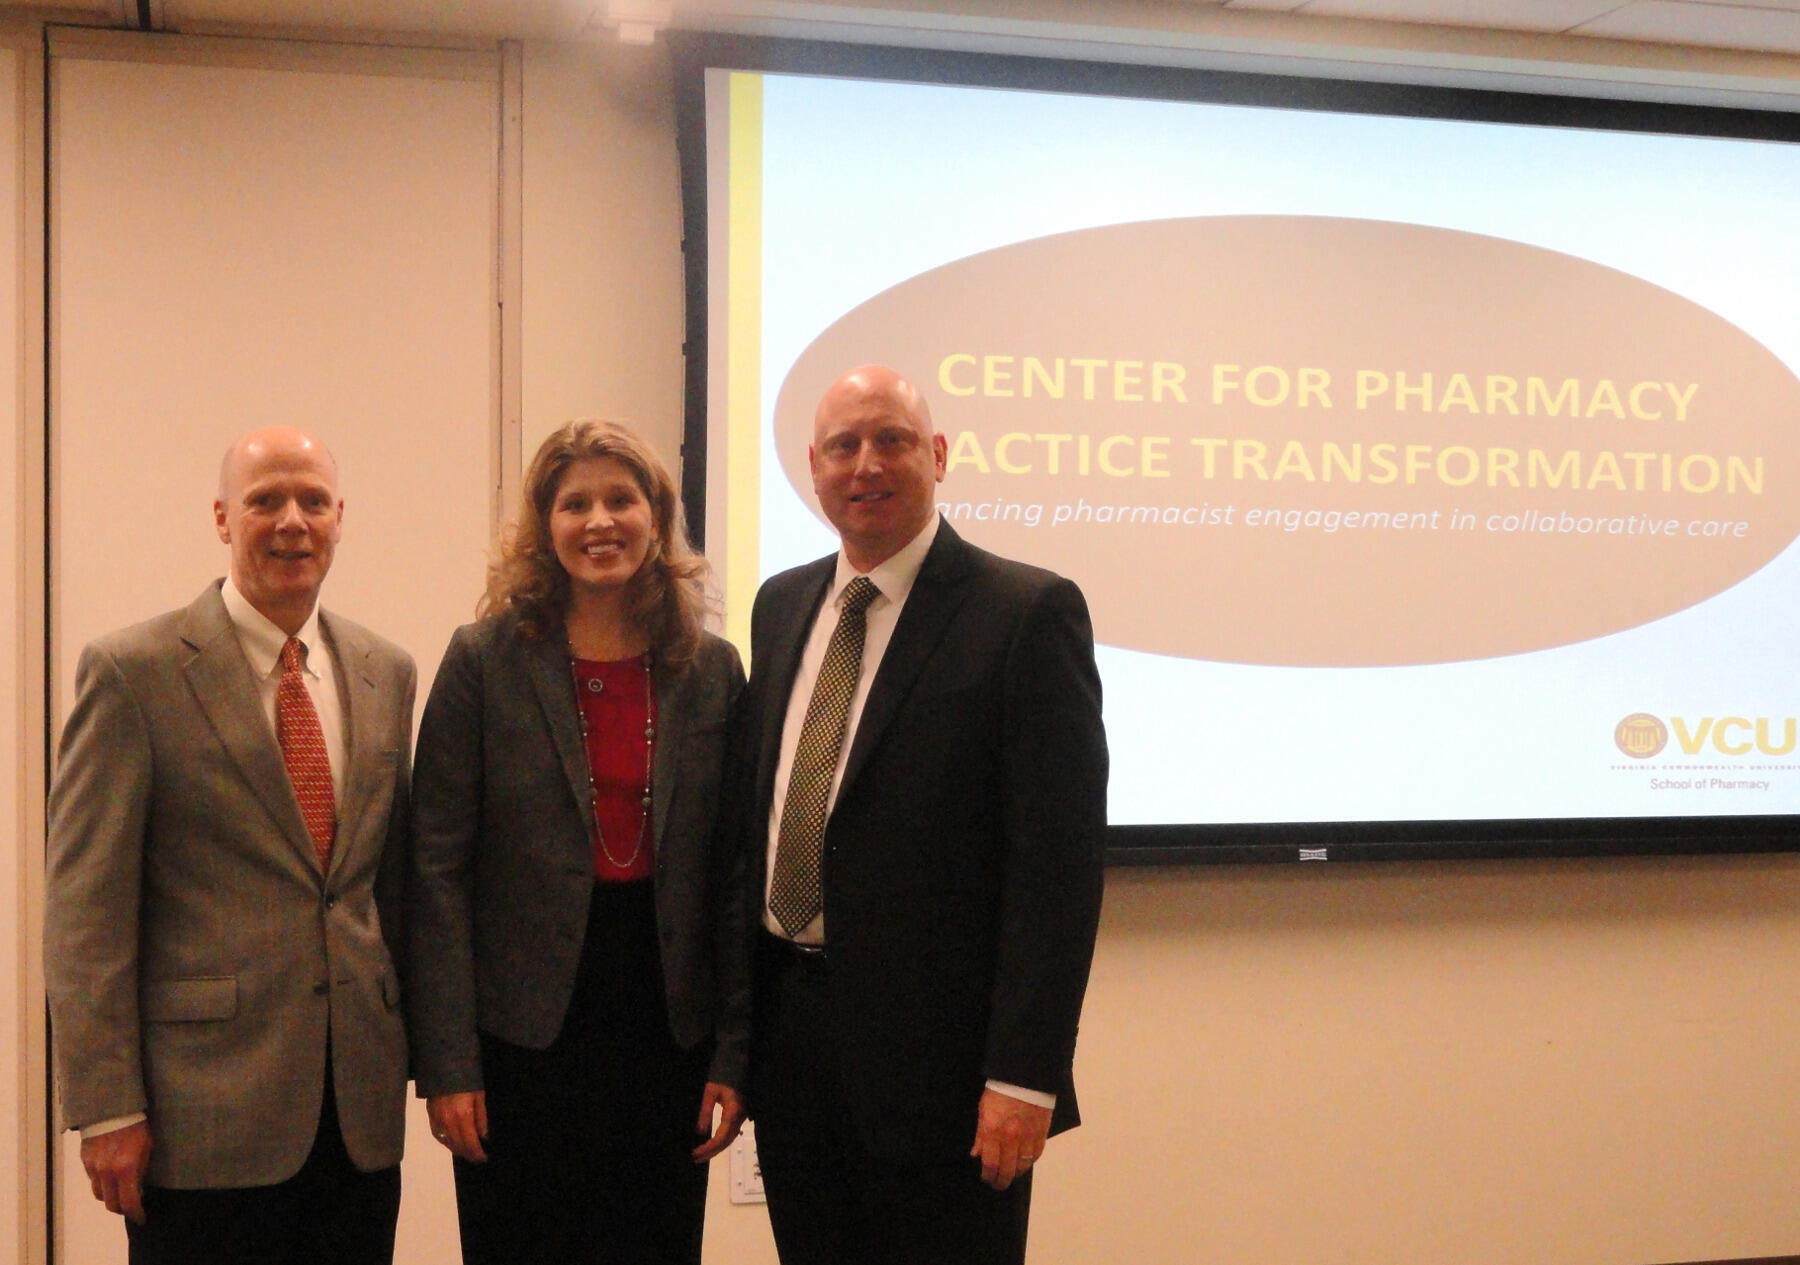 Joseph T. DiPiro (left), Pharm.D., dean of the School of Pharmacy, with Leticia Moczygemba (middle), Pharm.D., Ph.D., associate professor in the Department of Pharmacotherapy and Outcomes Science, and Donald Brophy, Pharm.D., professor and chairman in the Department of Pharmacotherapy and Outcomes Science, at the opening of the School of Pharmacy’s Center for Pharmacy Practice Transformation.
